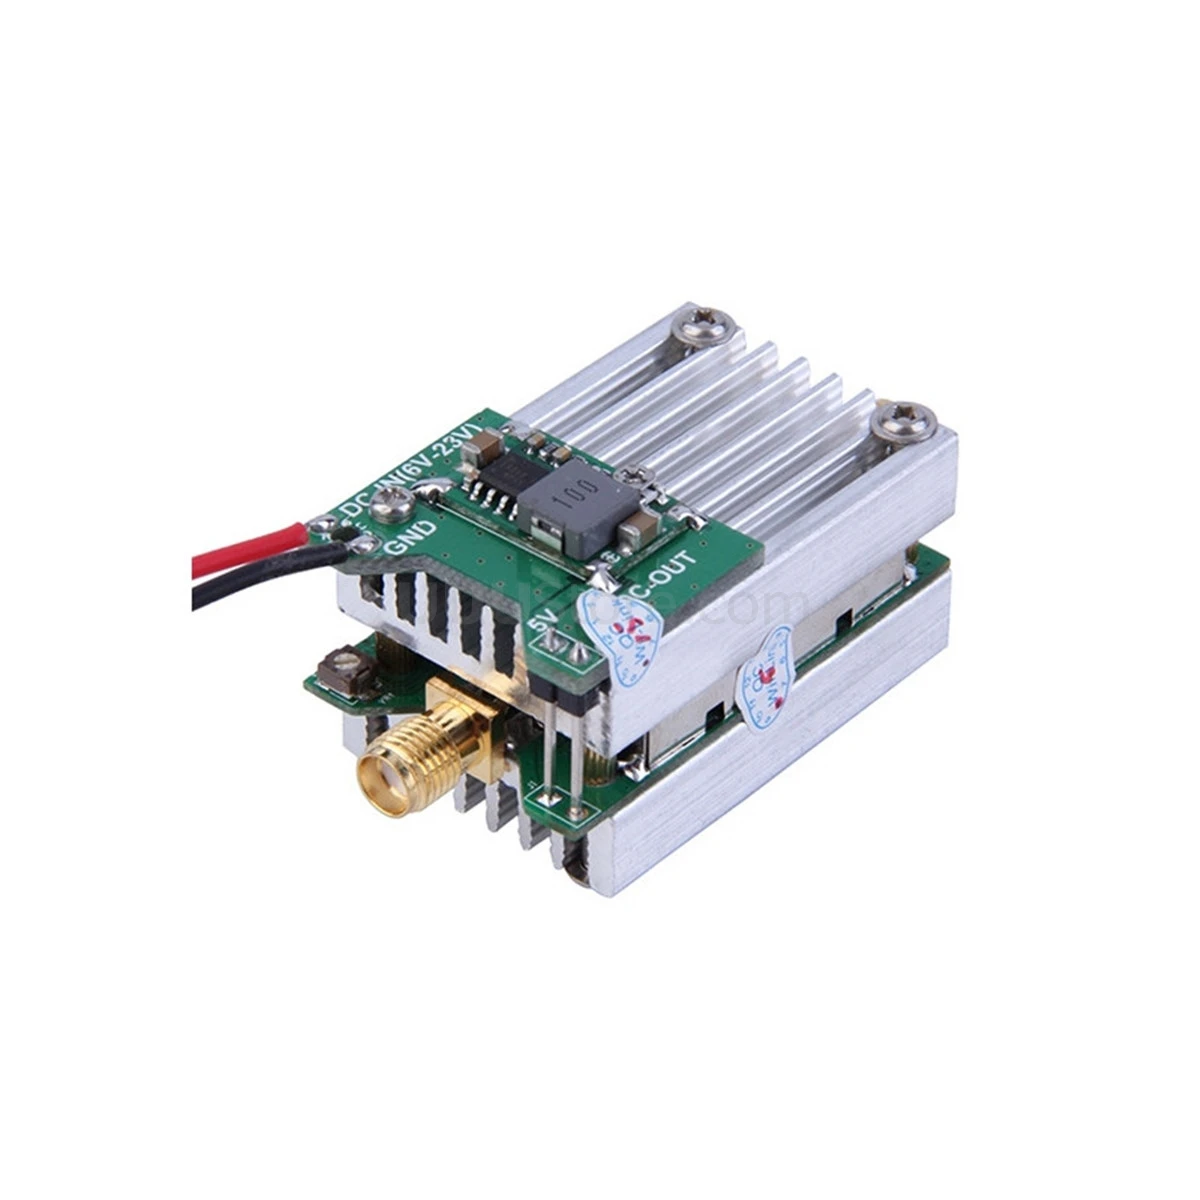 5.8Ghz 5.8G 2W 33dBm Gain Controllable Amplifier Signal Booster For FPV Multi VTX Transmitter RC Quadcopter 4